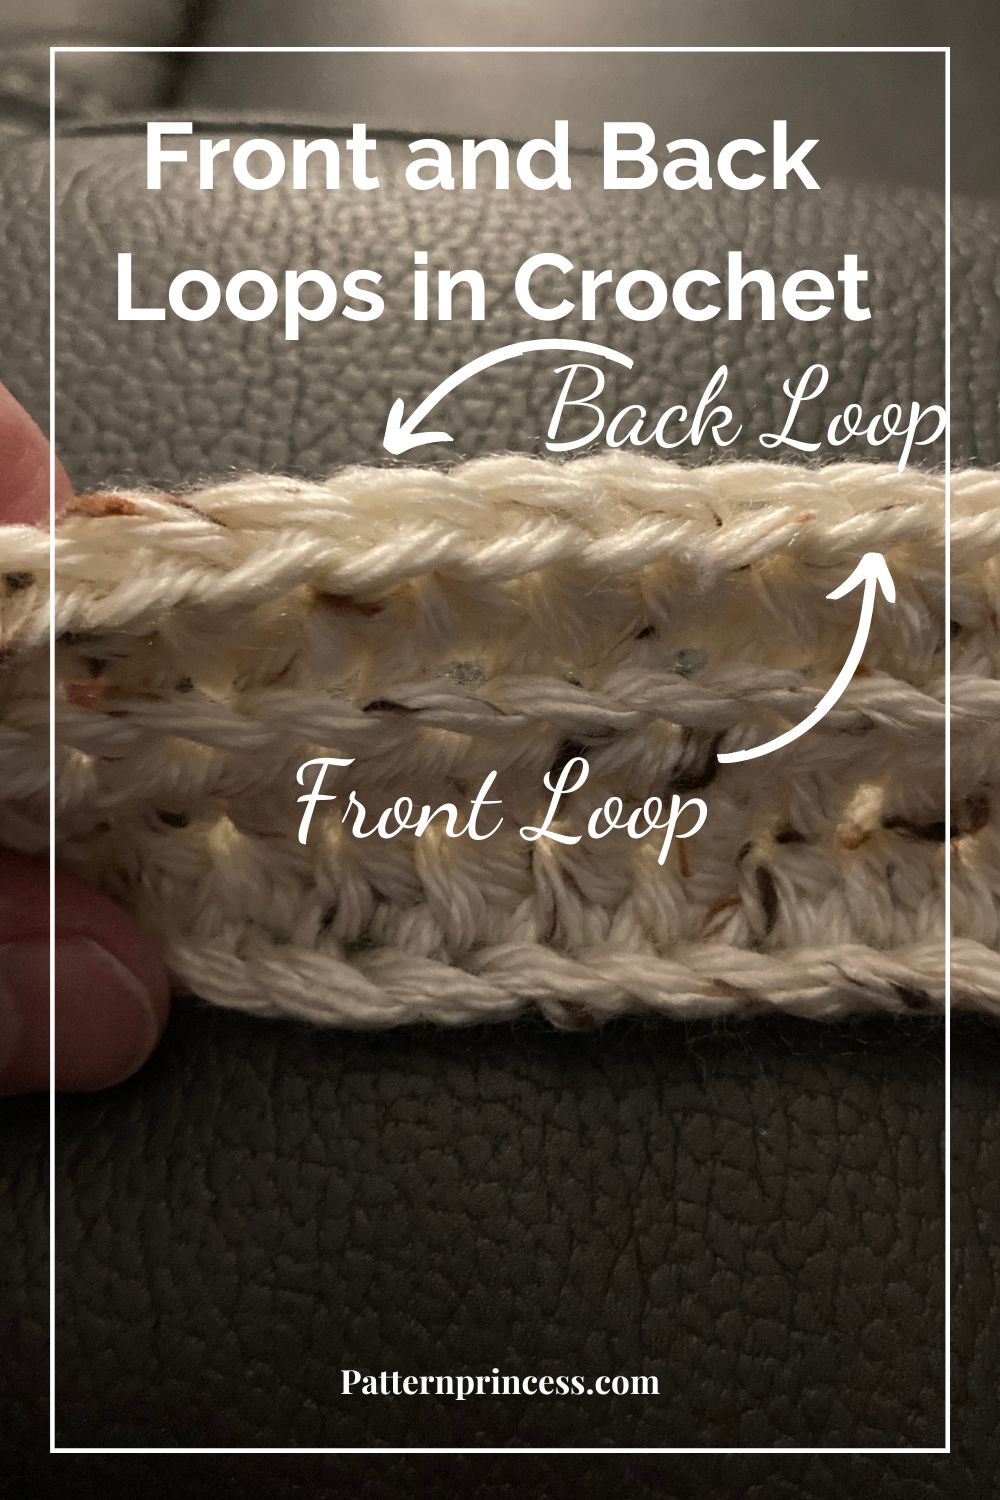 Front and Back Loops in Crochet